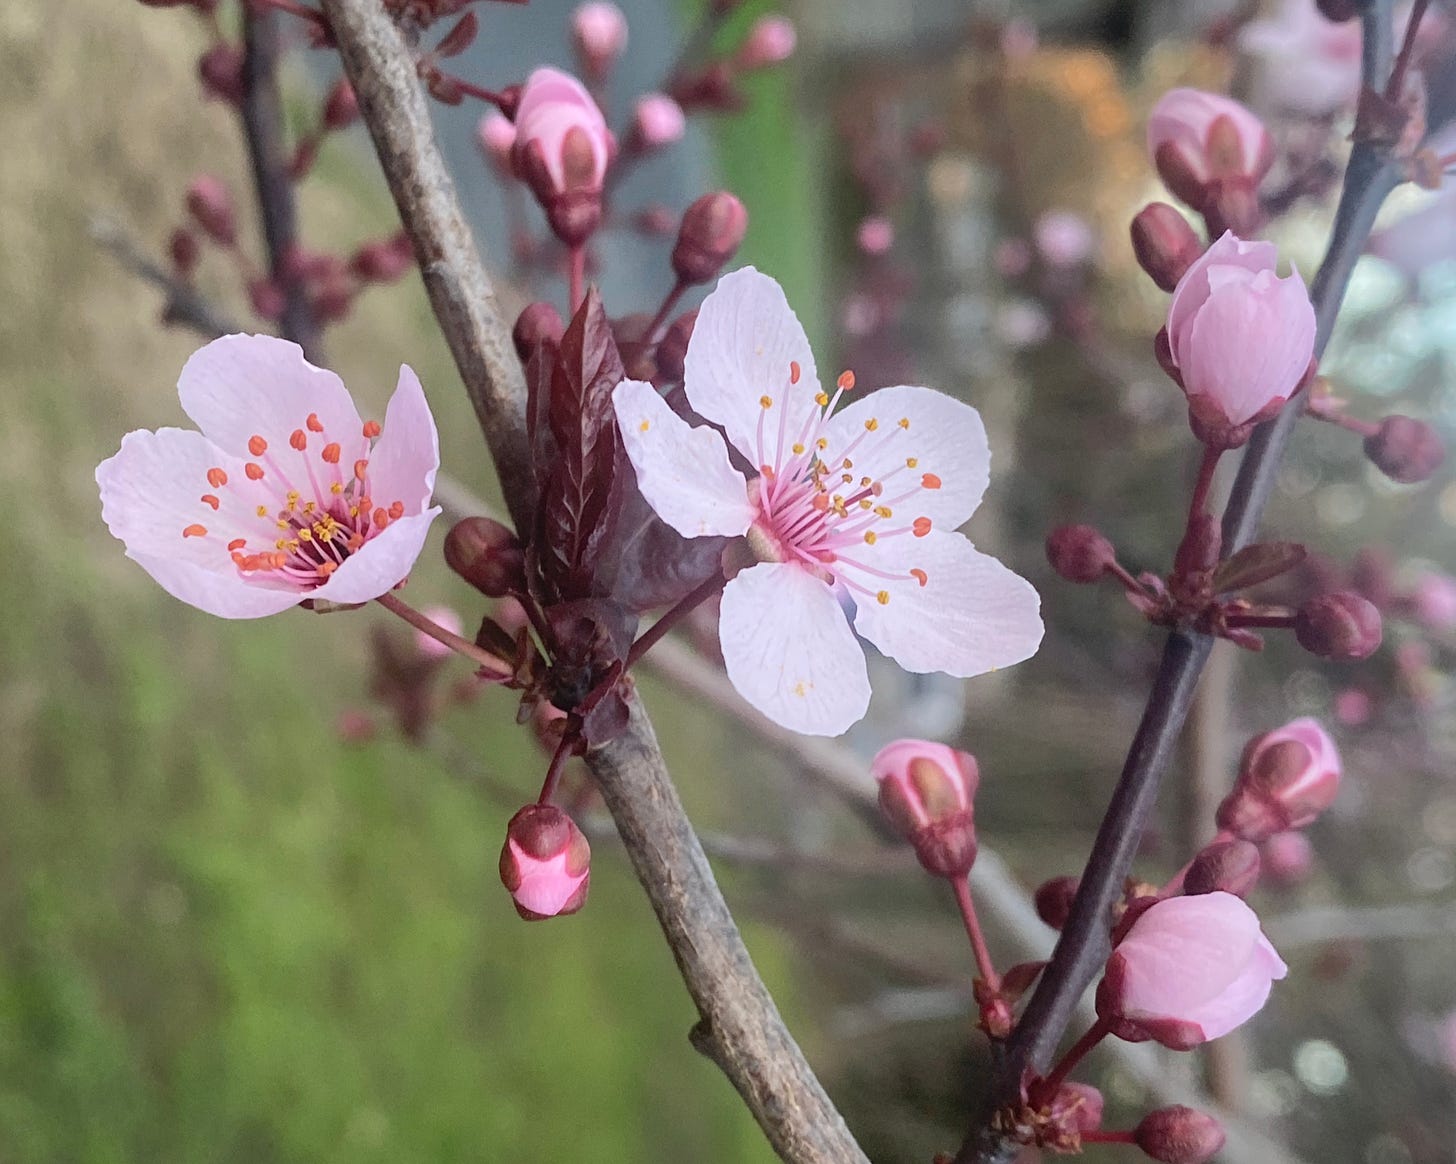 small pink flowers opening on a tree